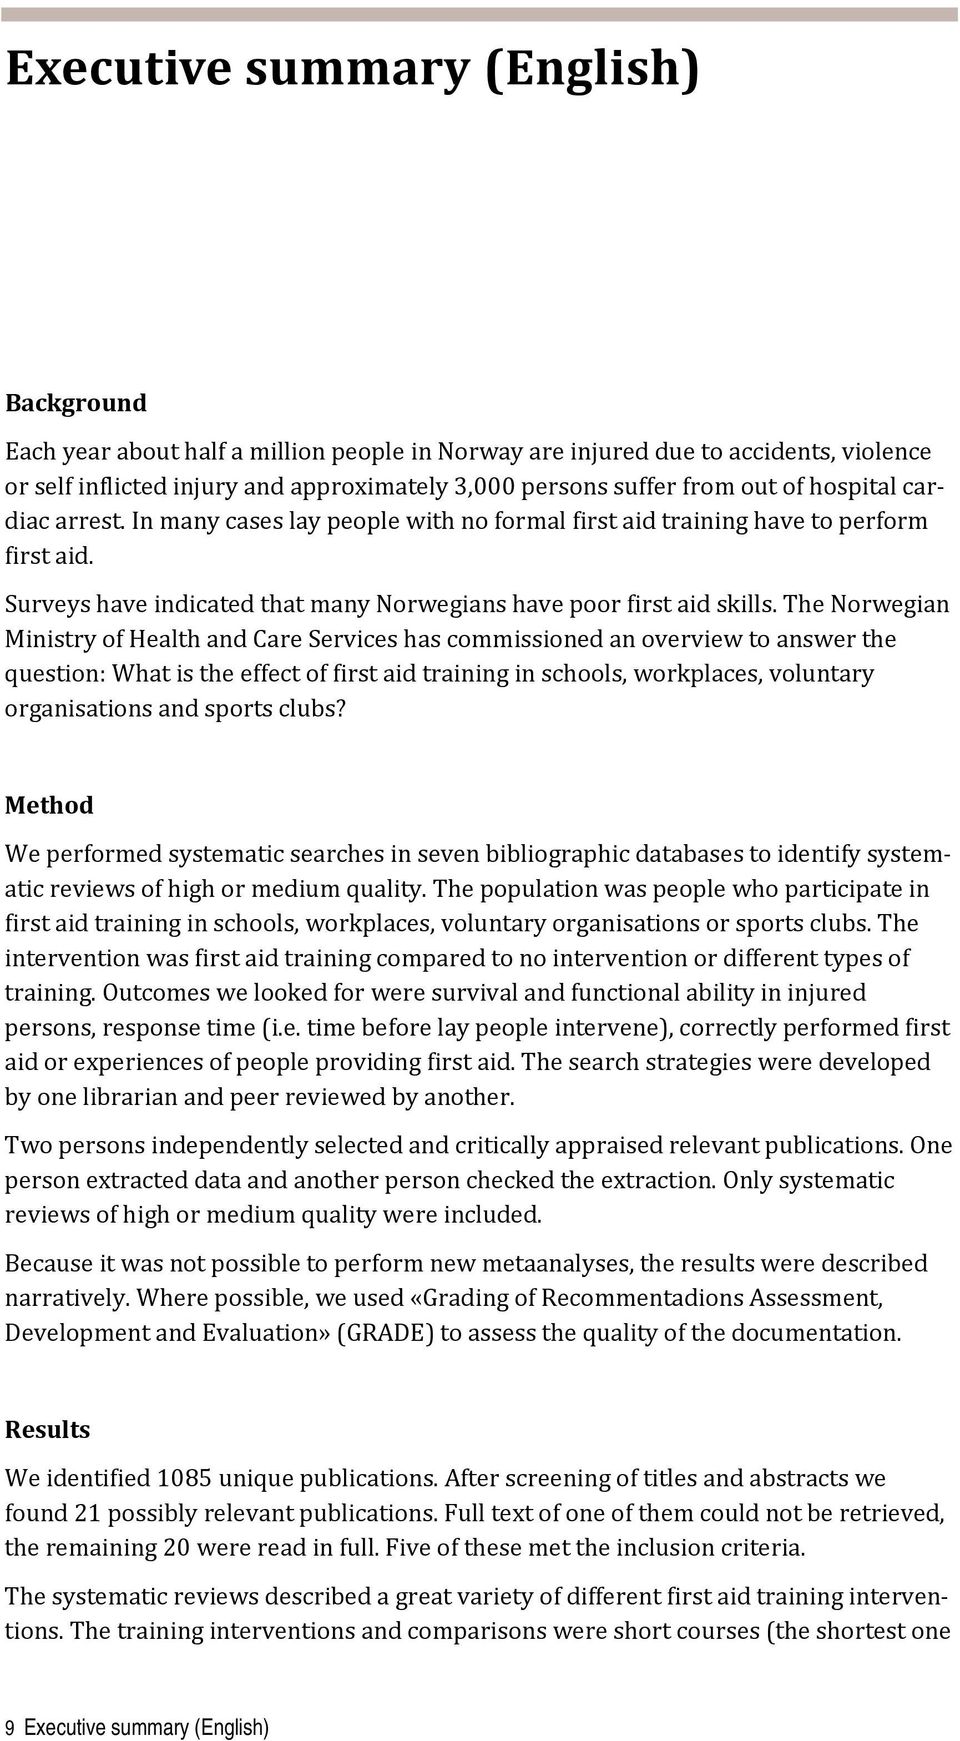 The Norwegian Ministry of Health and Care Services has commissioned an overview to answer the question: What is the effect of first aid training in schools, workplaces, voluntary organisations and